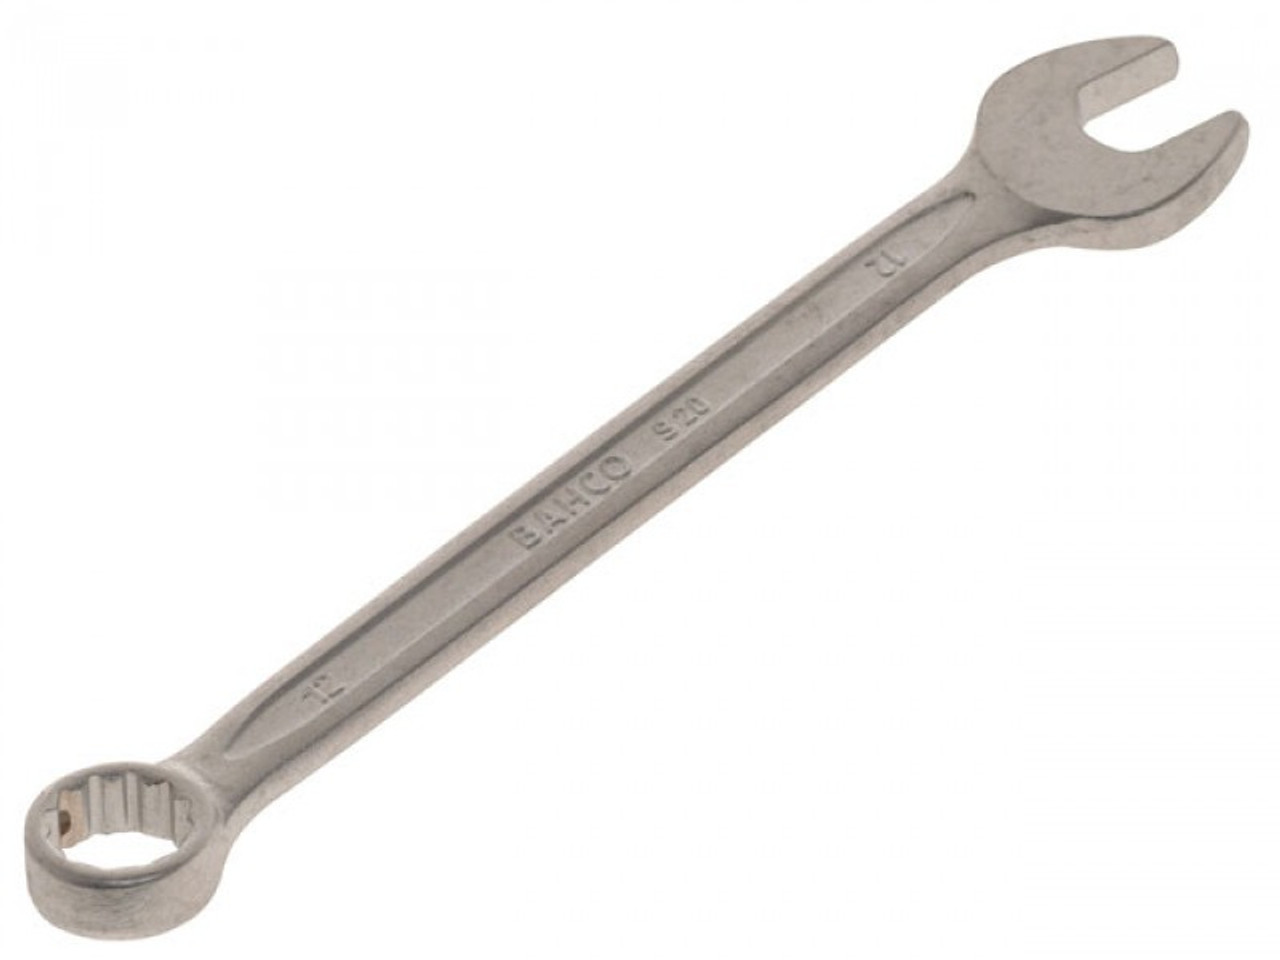 IMPA 616168 WRENCH OPEN & 12-POINT BOX INCH 5/16"AF TRANSTIME